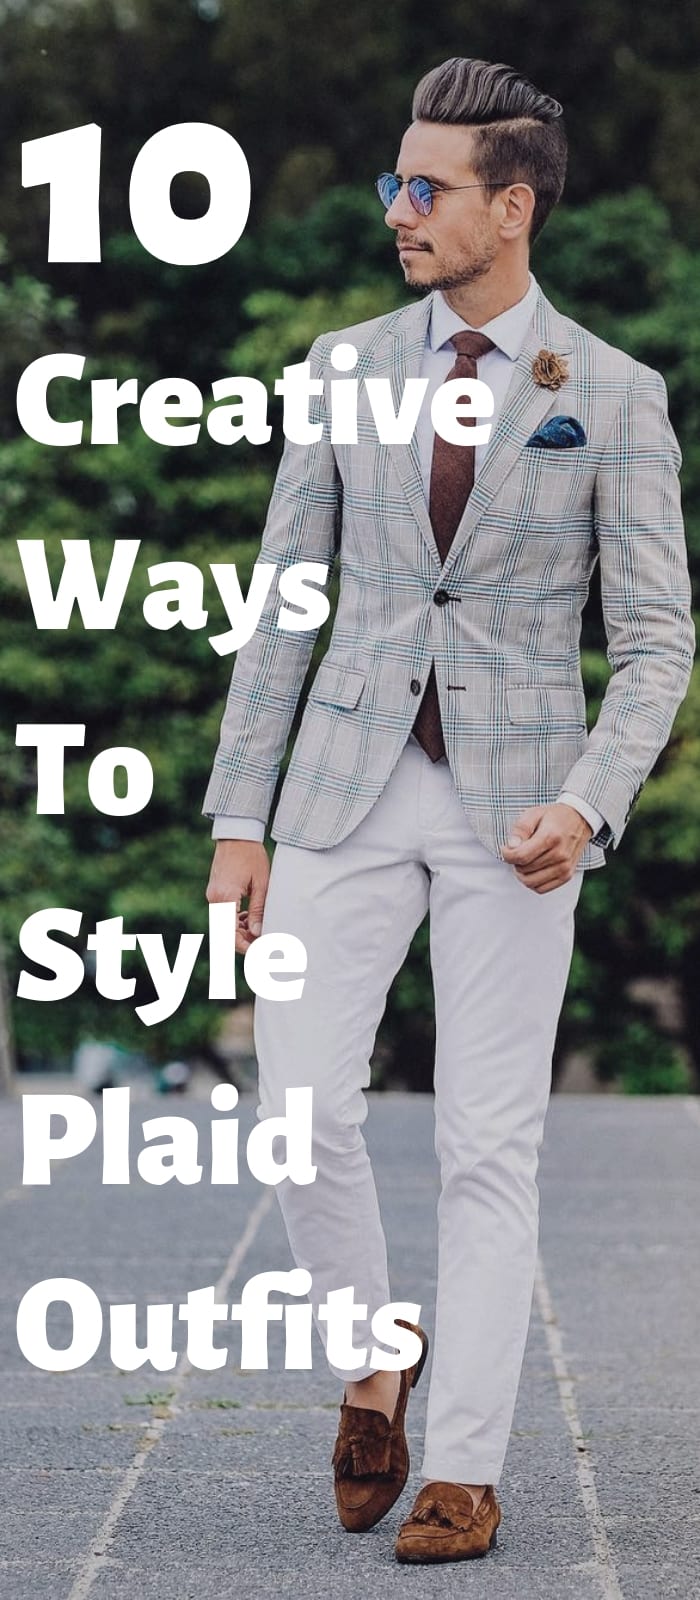 10 Creative Ways To Style Plaid Outfits !